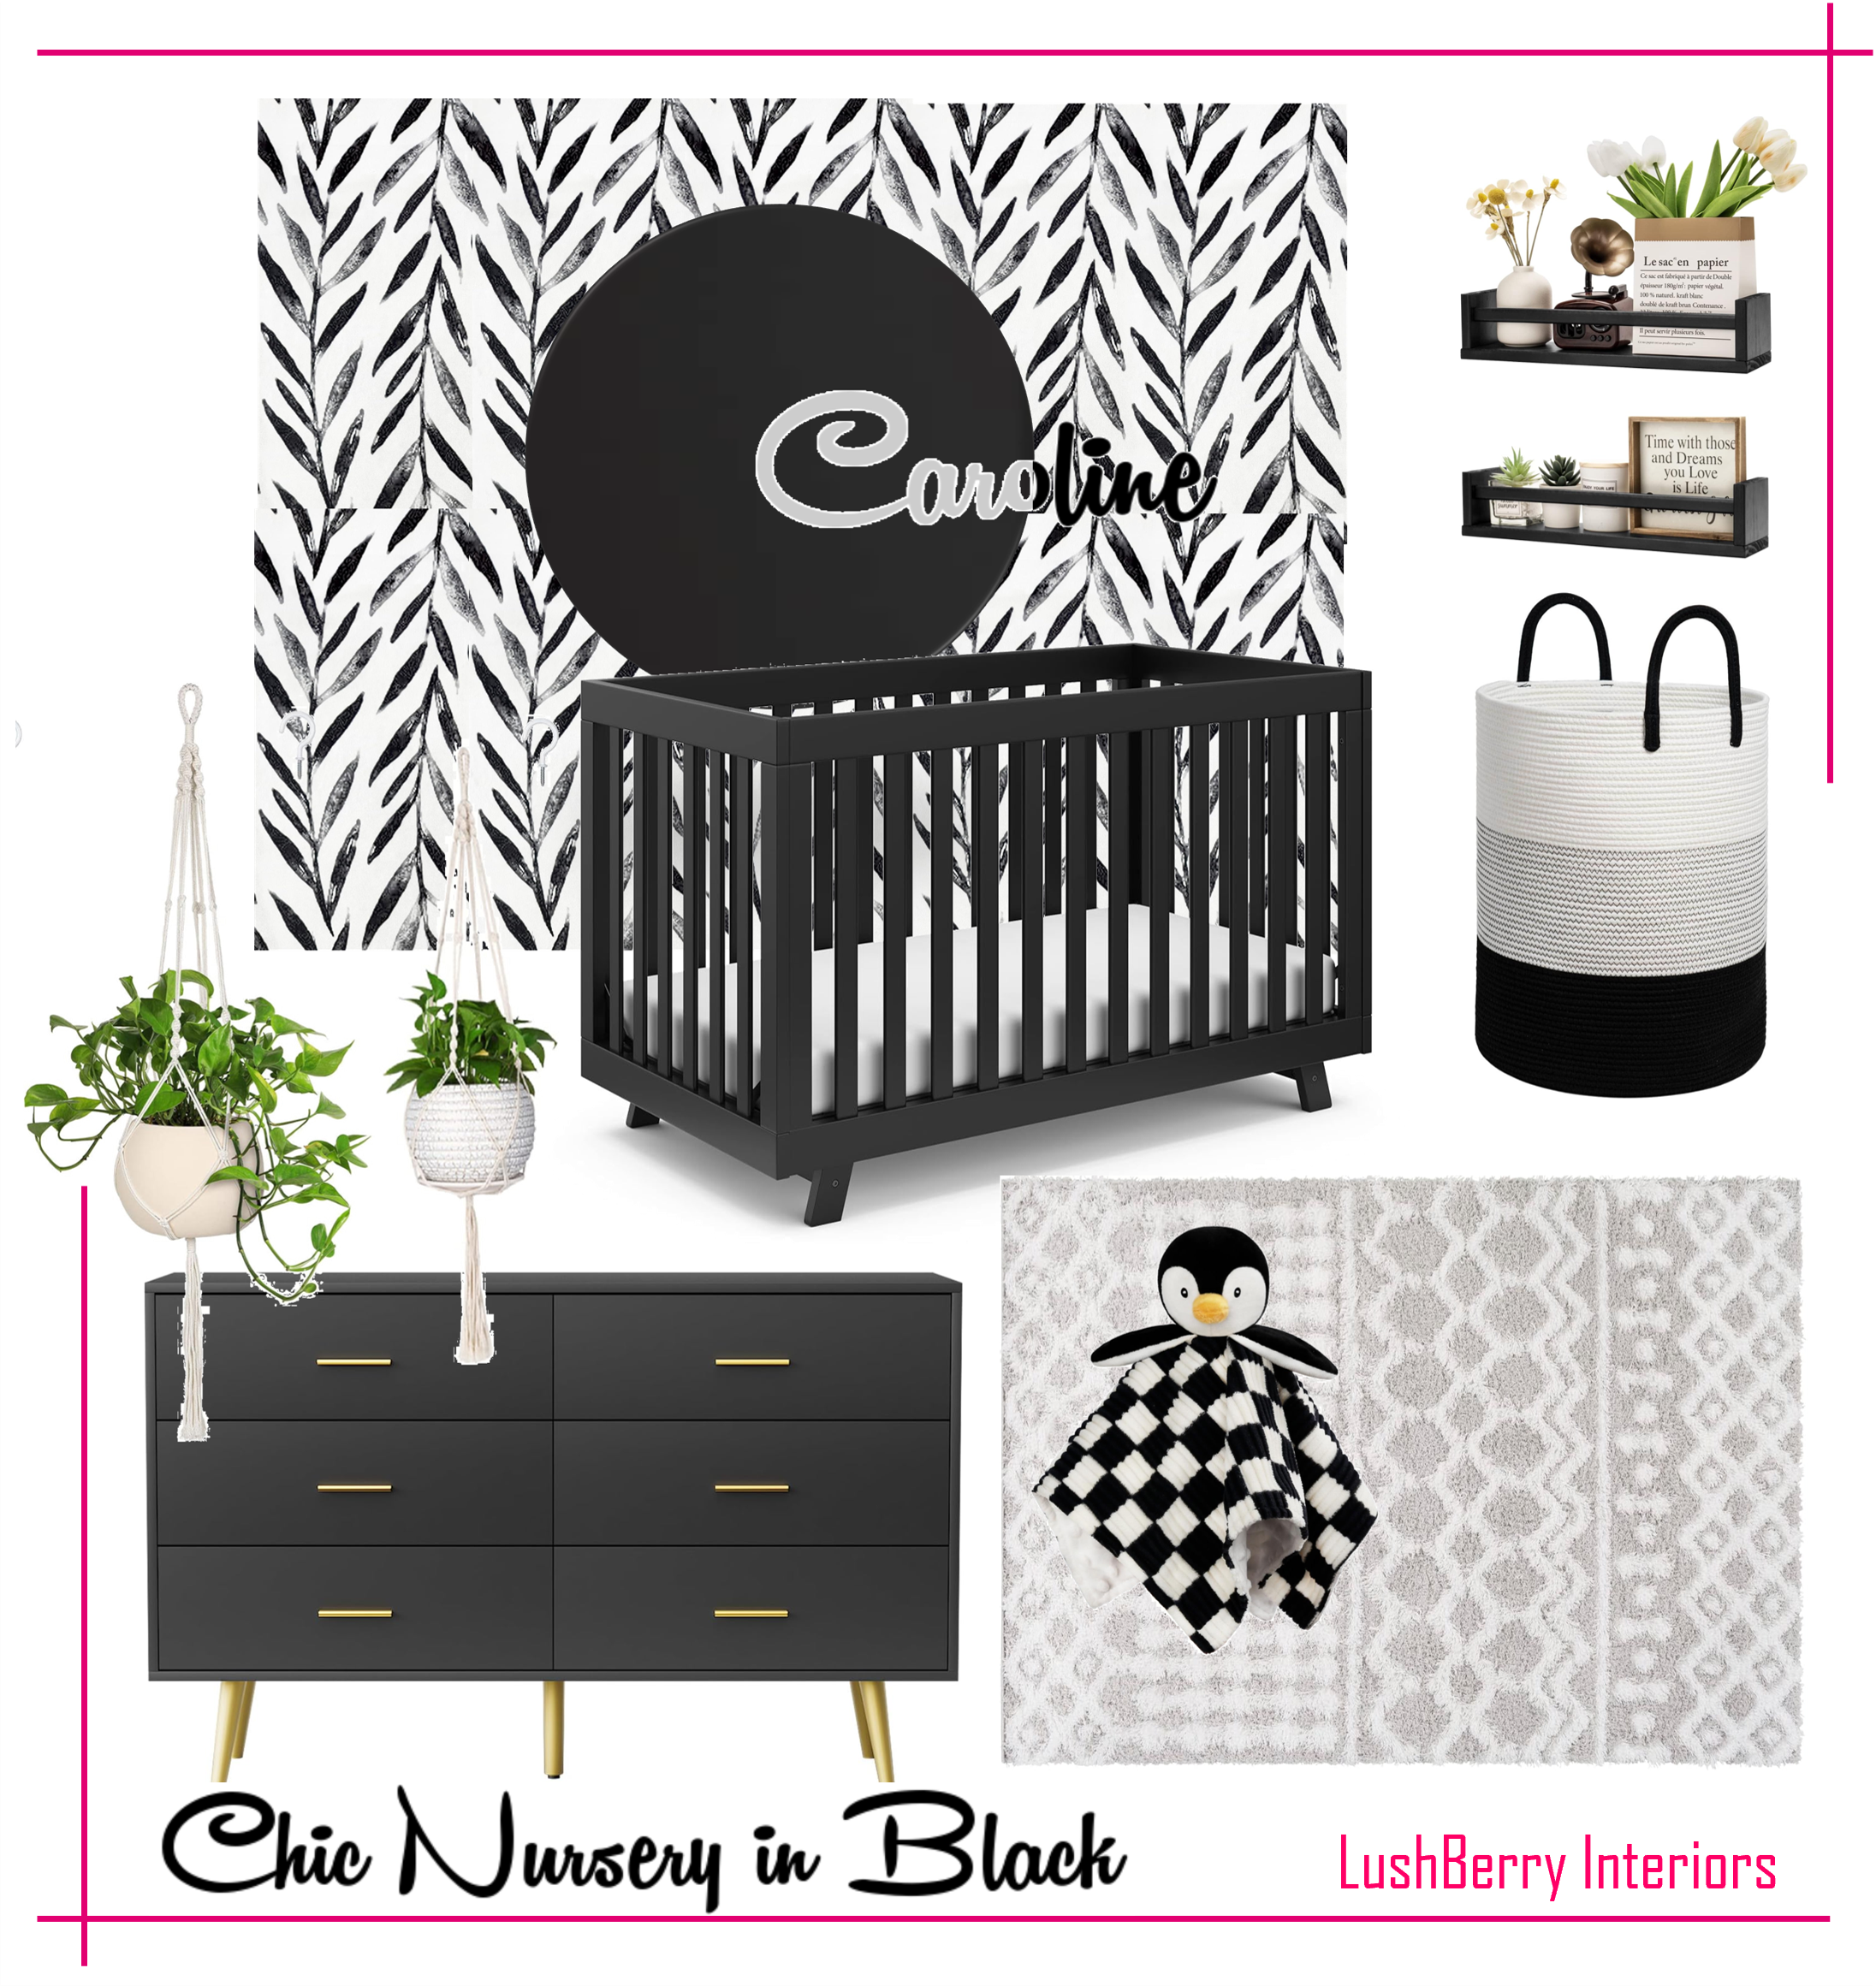 Chic Baby Nursery in Black and White - Mood board 1